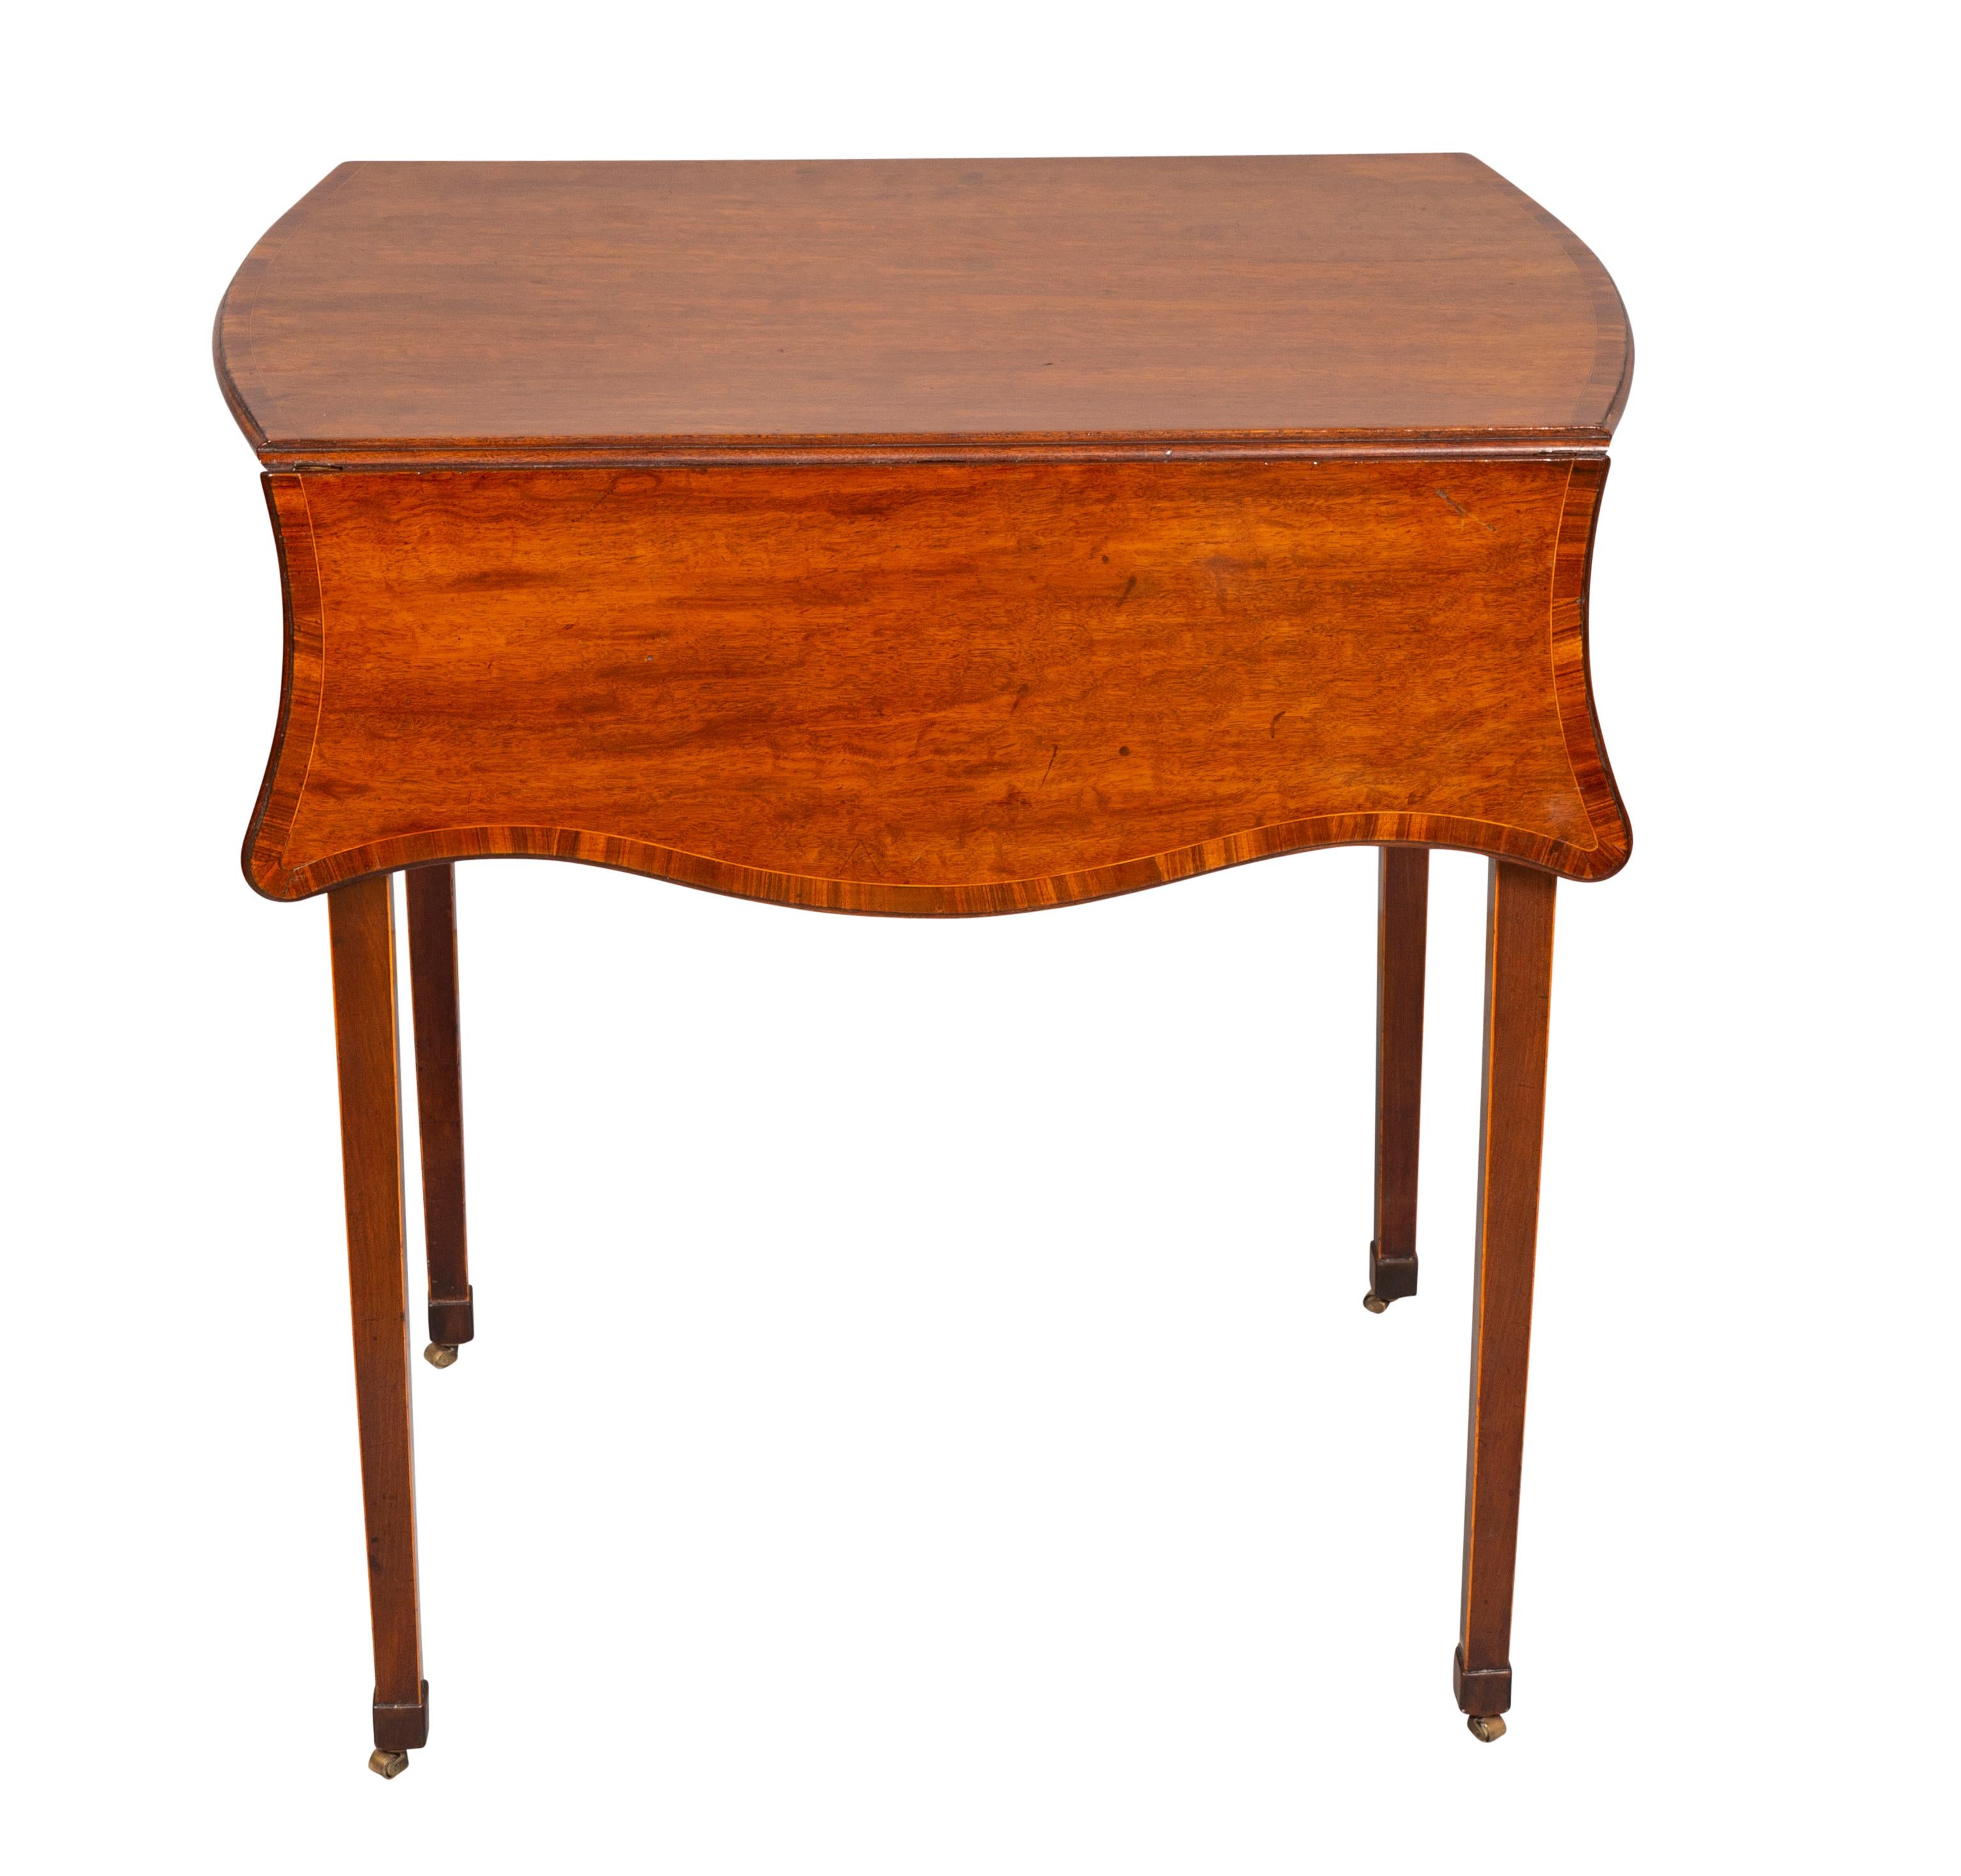 Rectangular top with a pair of serpentine drop leaves all with banded edge over a frieze containing a drawer, raised on square tapered legs and casters.